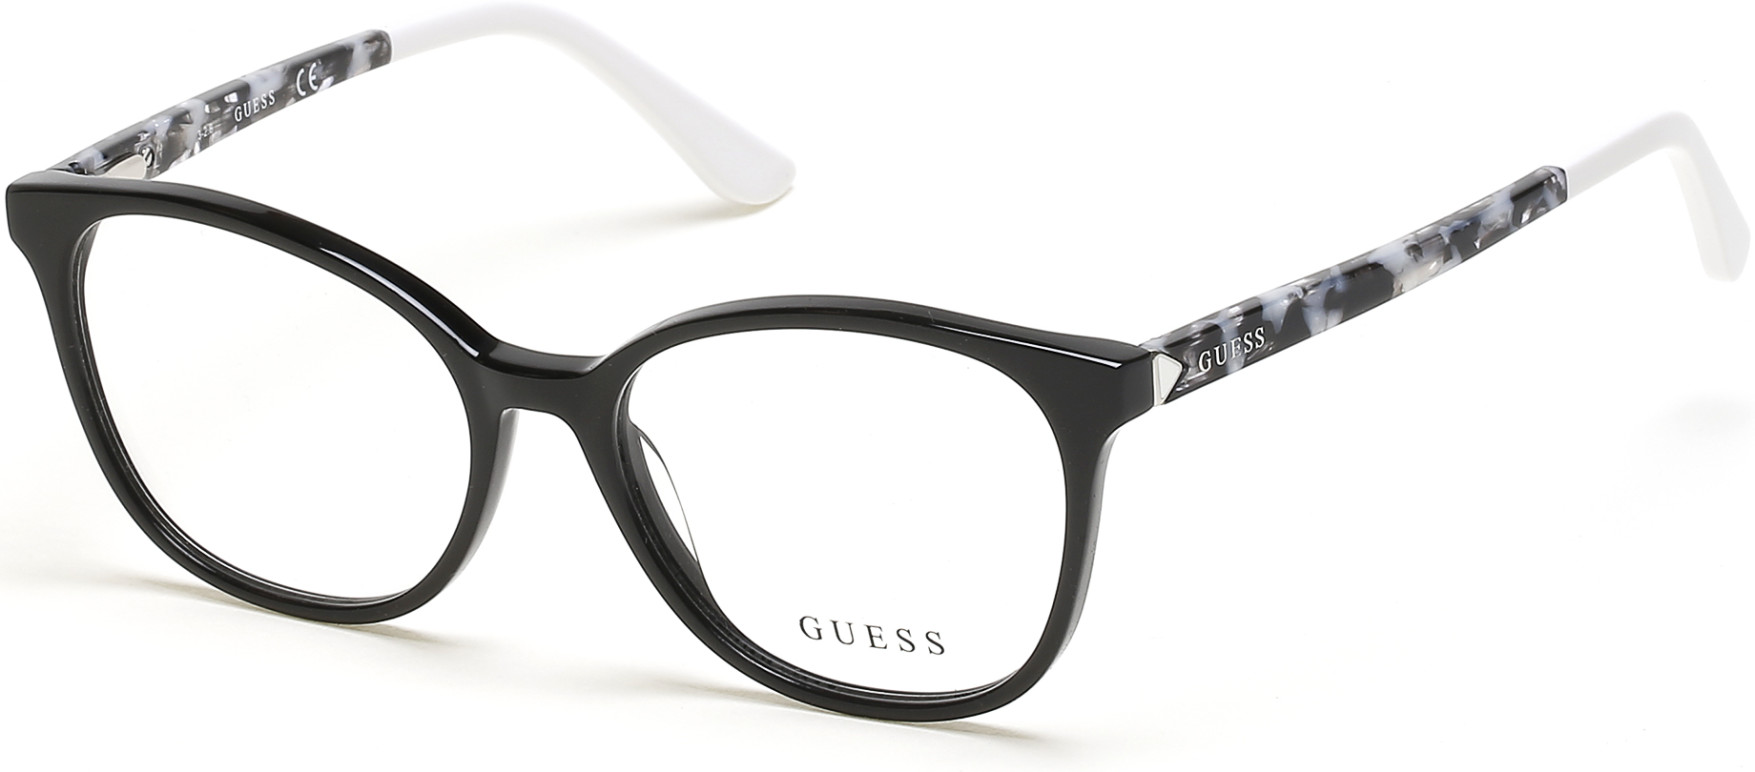 GUESS 2698 004